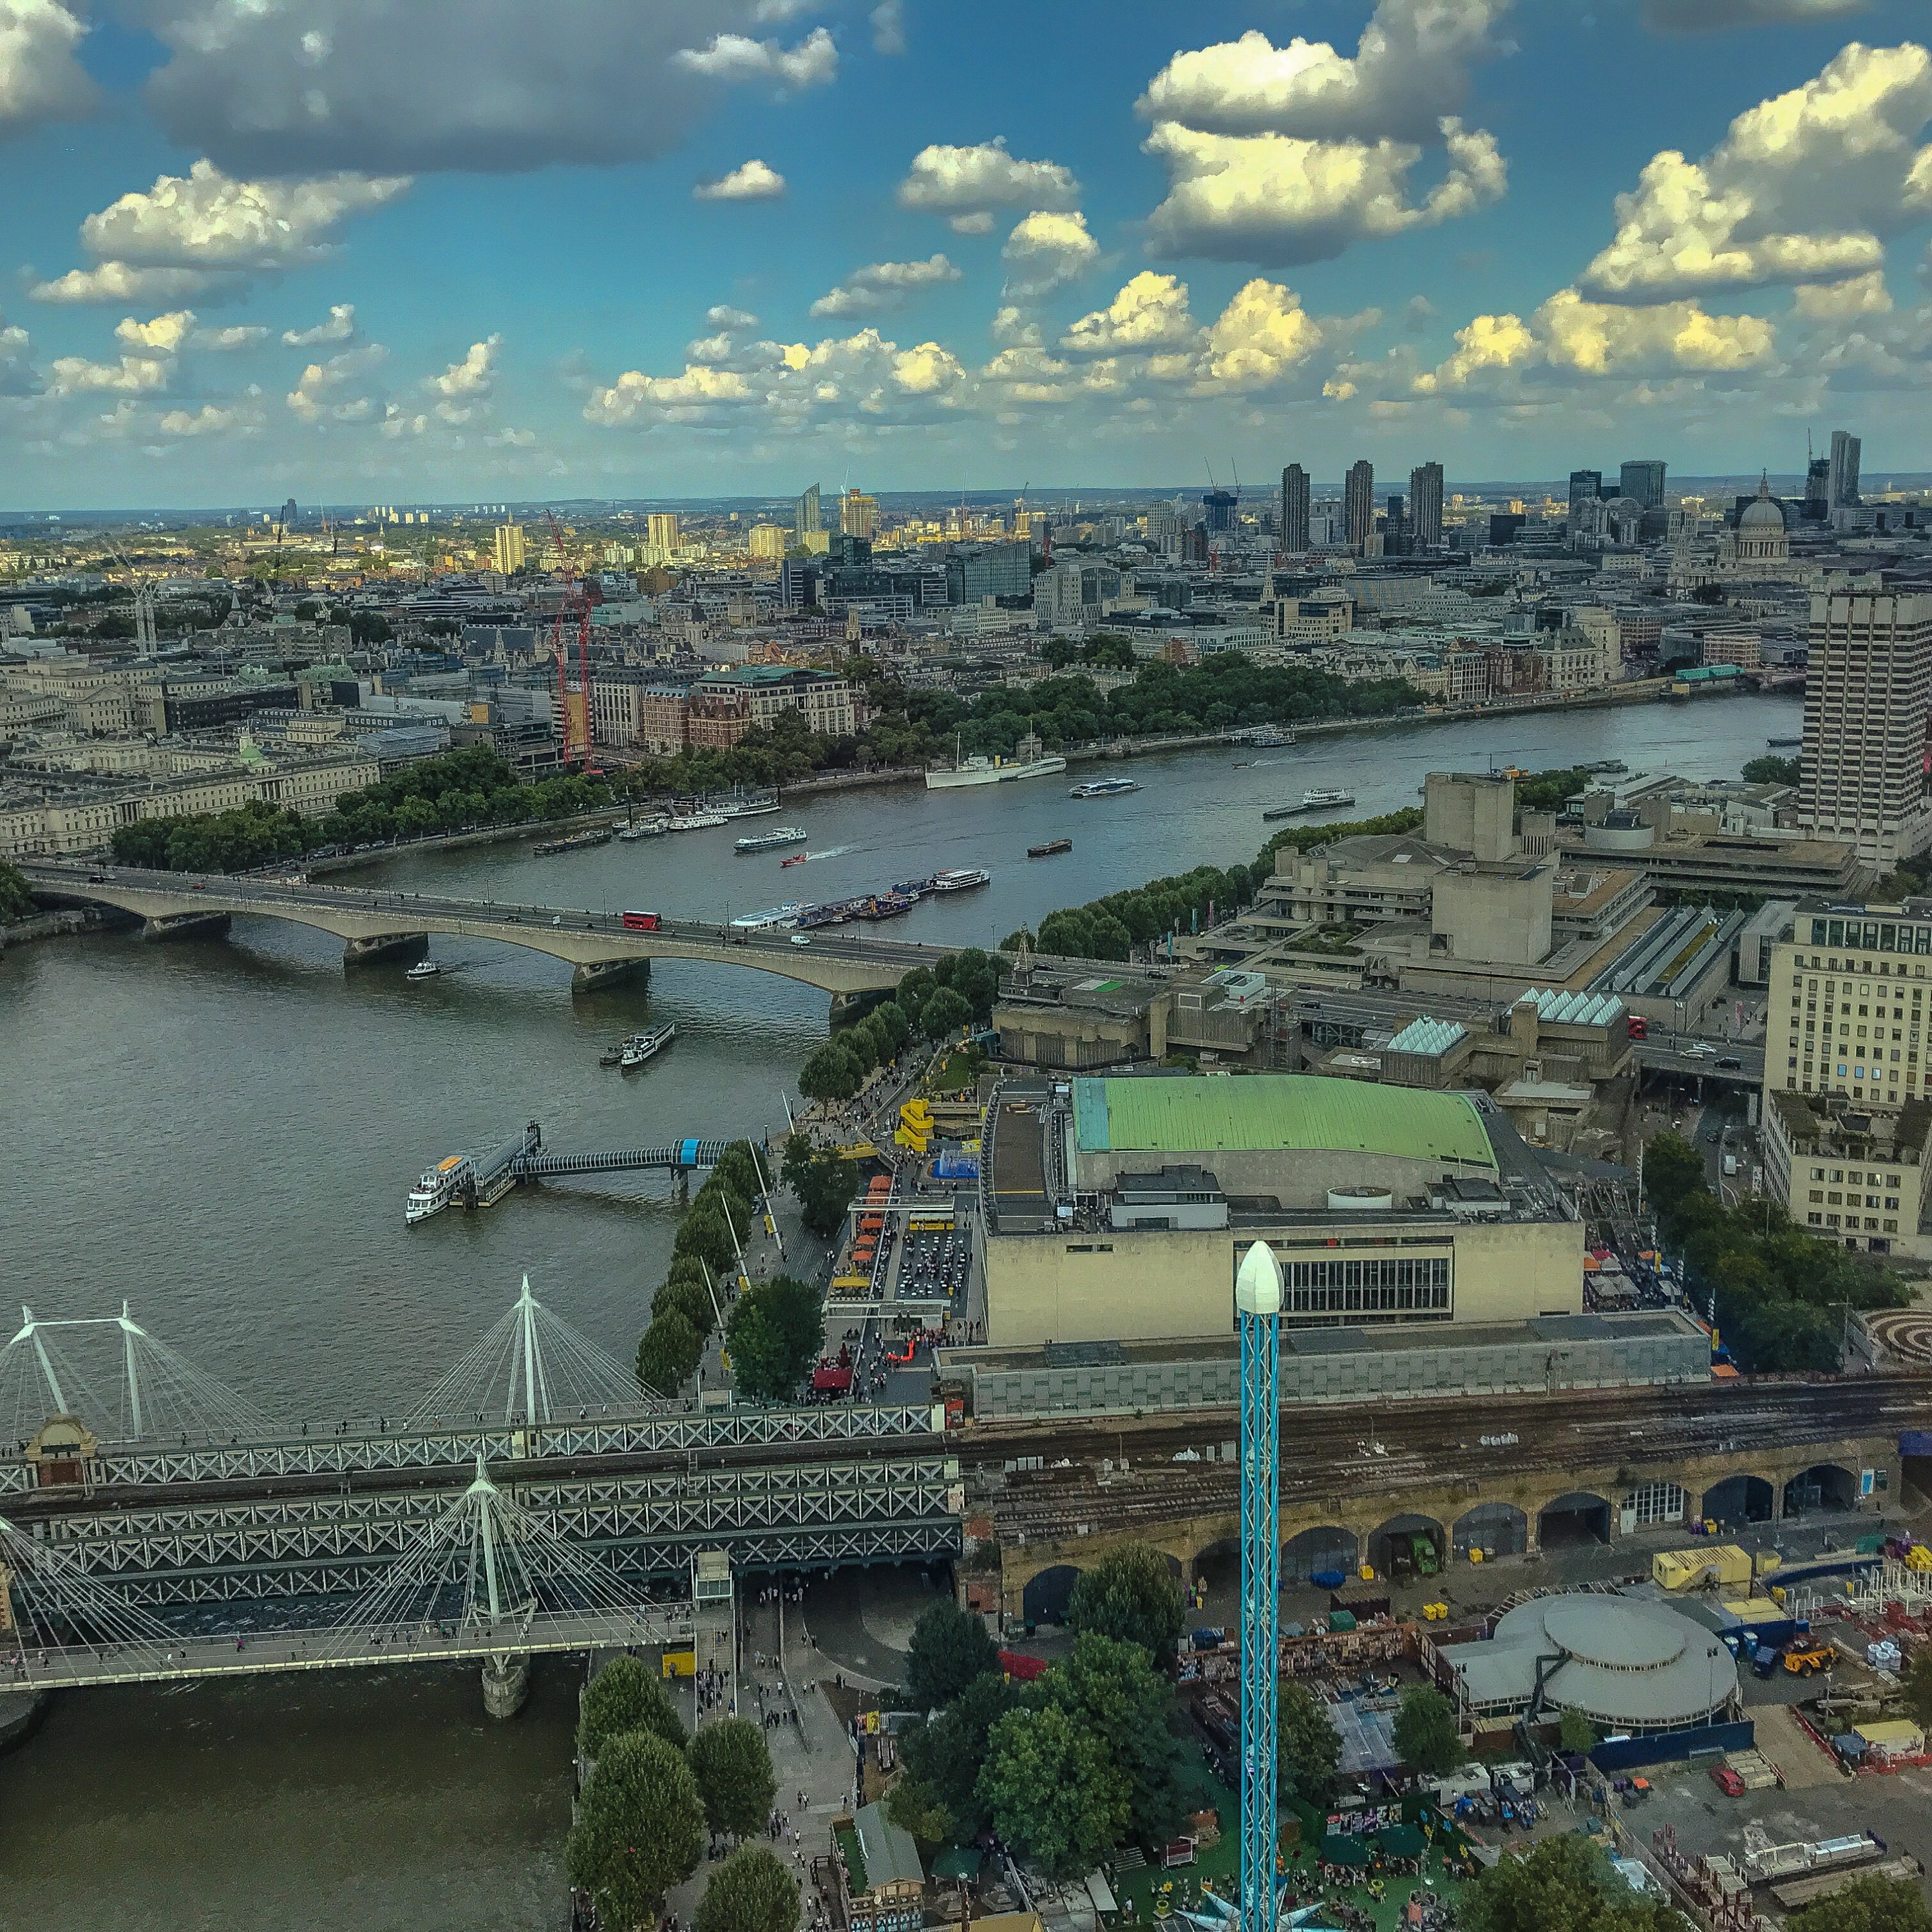 Aerial image of London river Thames